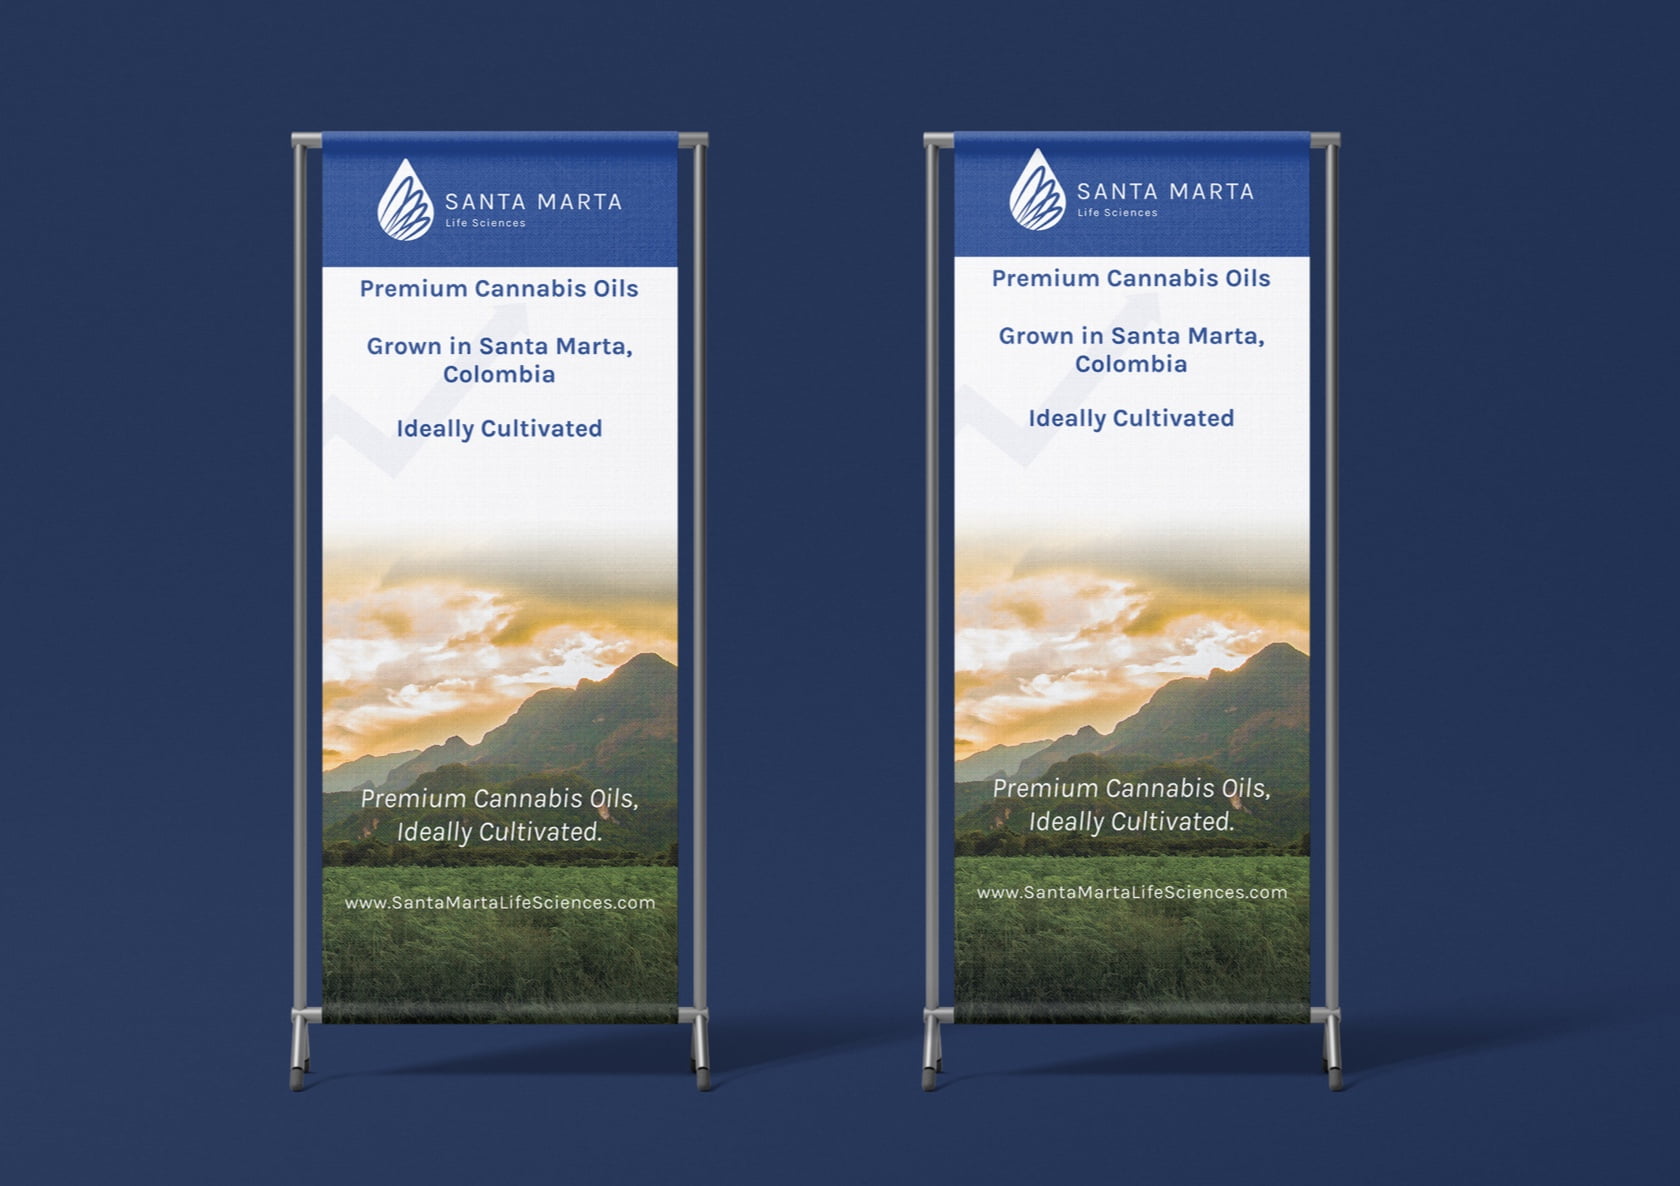 Mockup of Santa Marta Life Sciences' trade show banners side by side